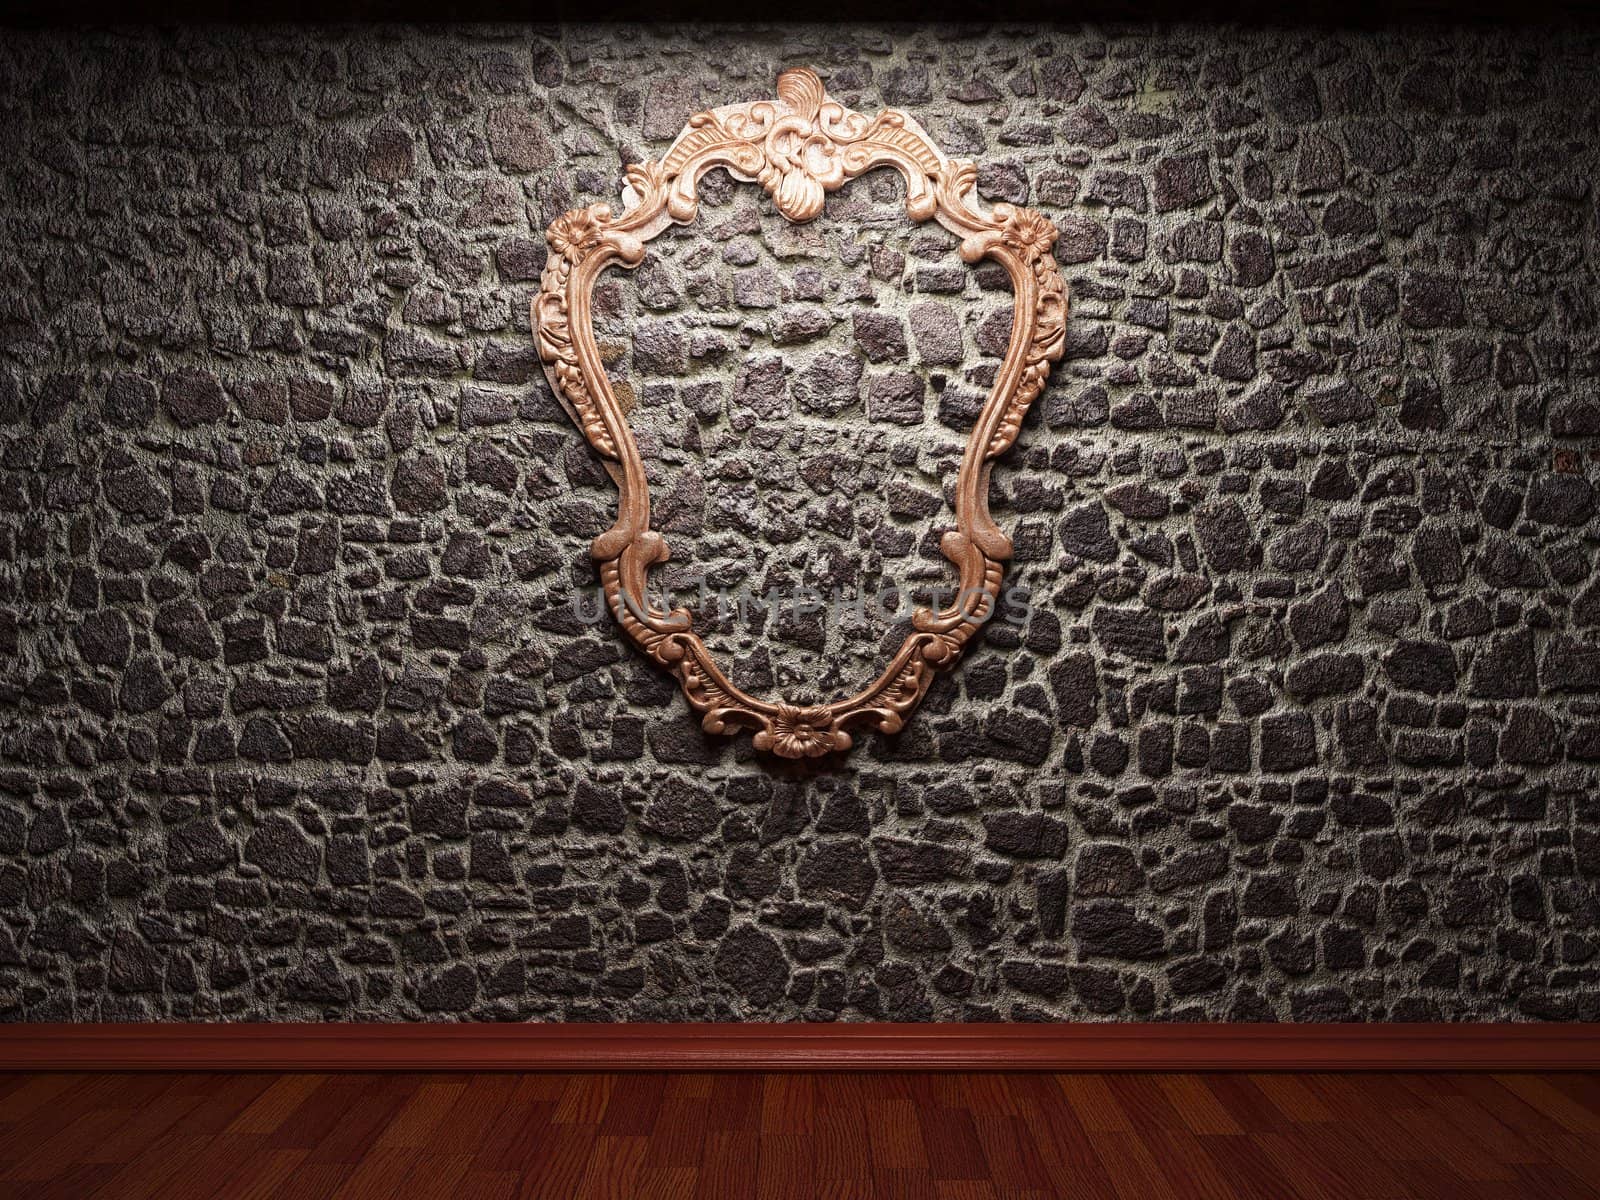 illuminated stone wall and frame made in 3D